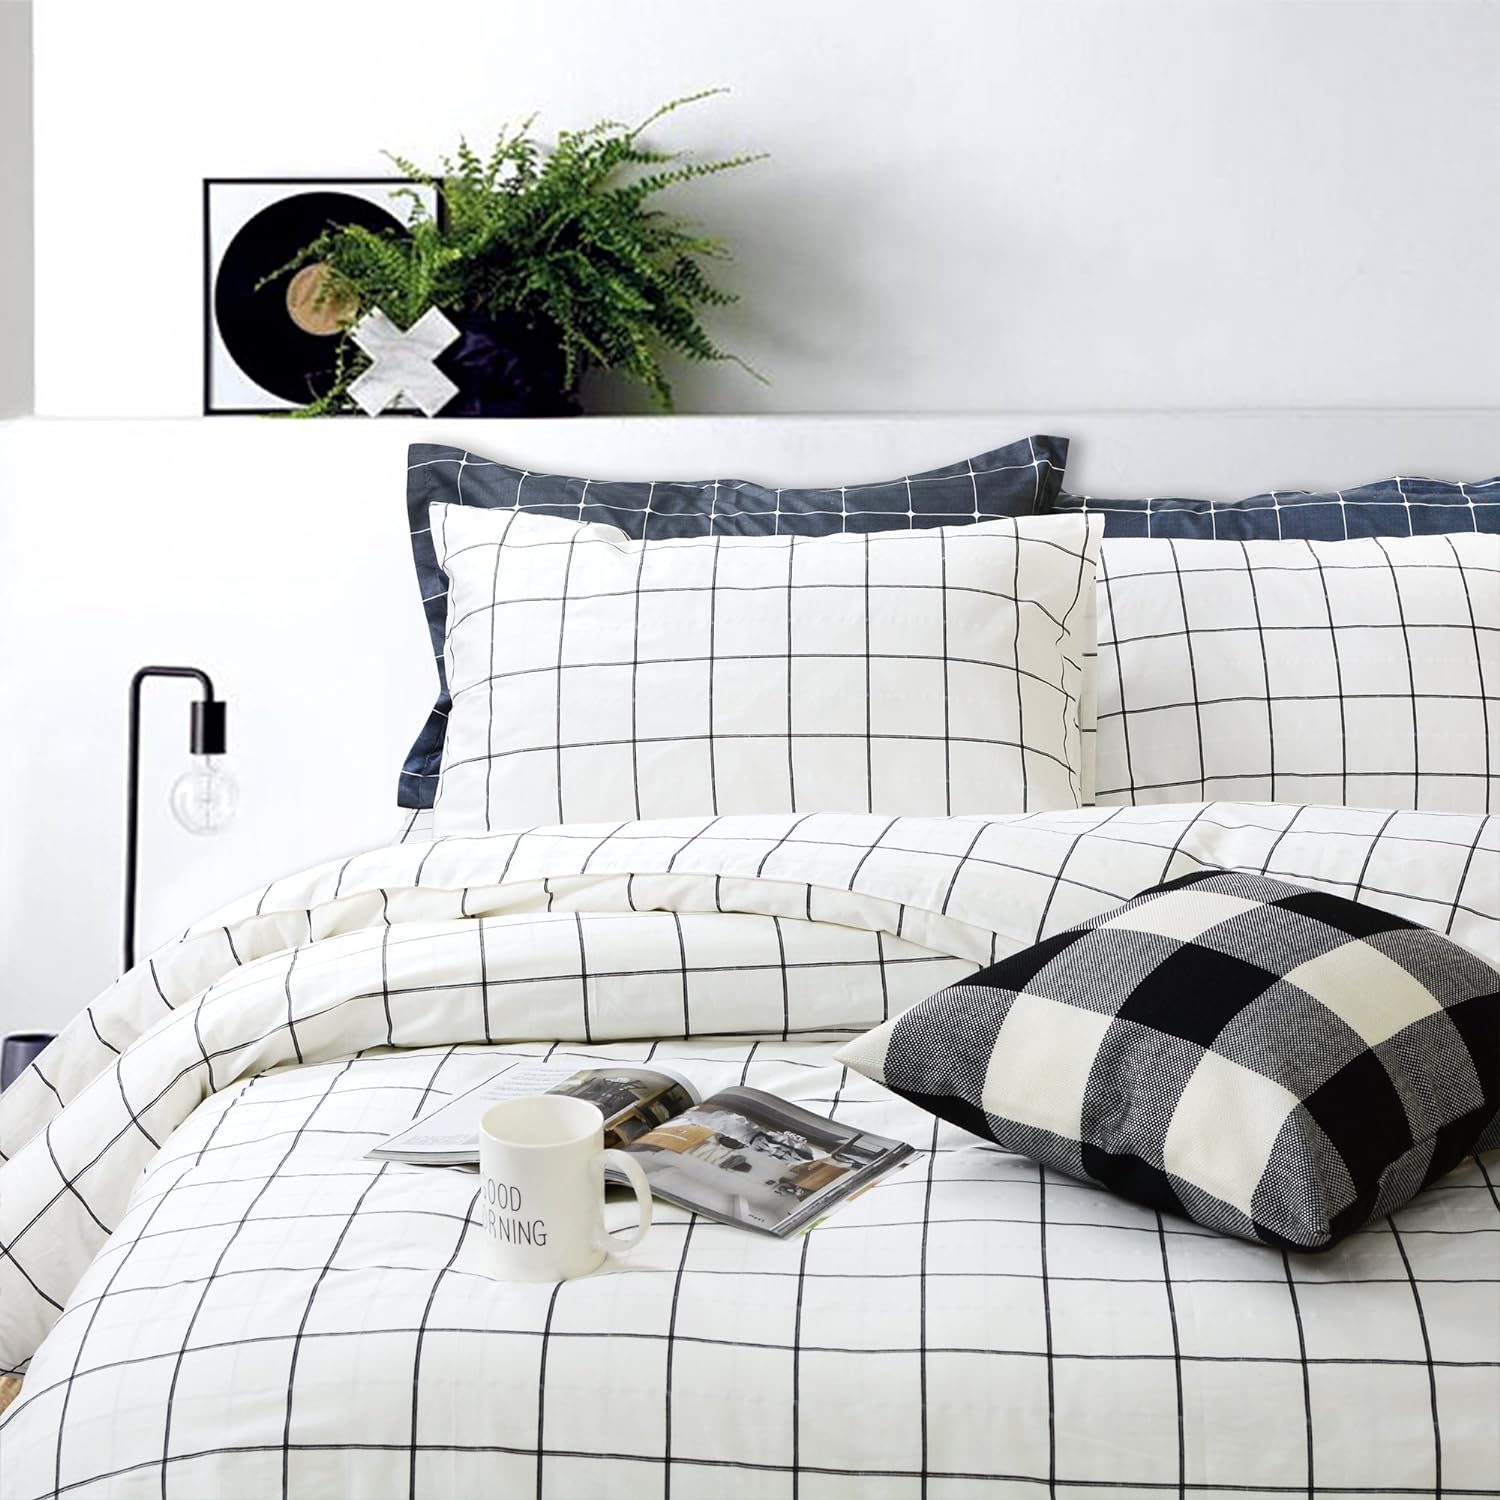 FADFAY Black and White Grid Duvet Cover Sets Lightweight Cotton Bedding Set Lattice Checkered Reversible White Duvet Cover Bedding Collection 3 Pieces,1duvet Cover & 2pillowcases,Queen Size